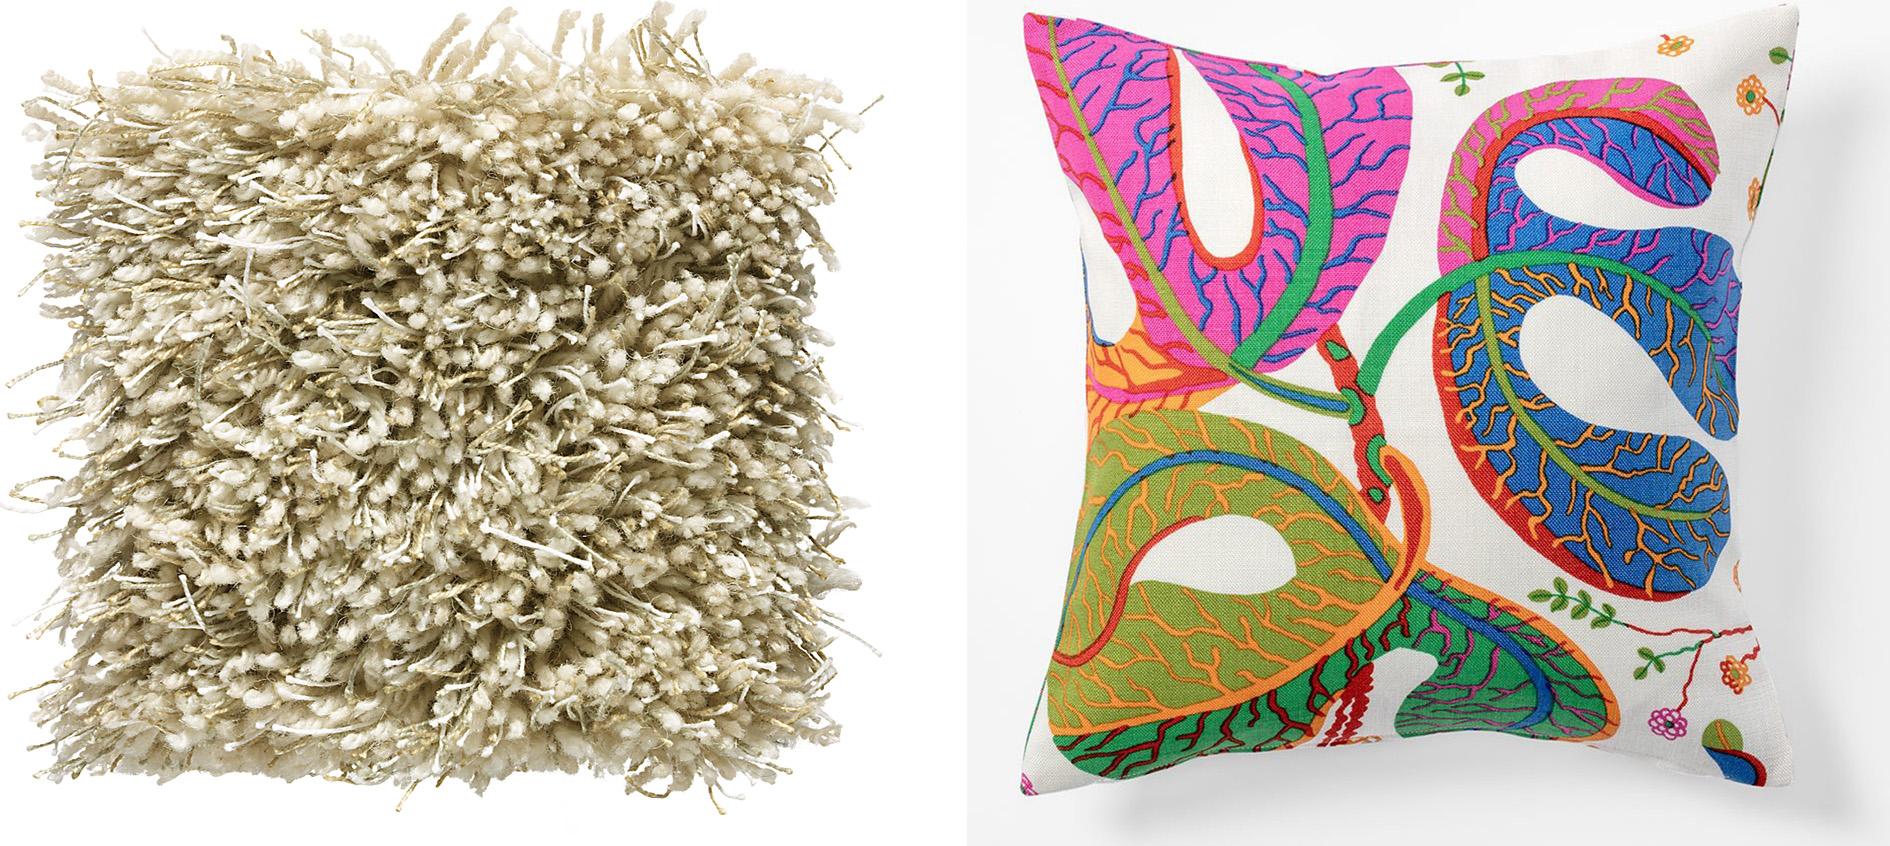 Left: A beige long-pile rug. Right: A cushion with a colourful pattern.